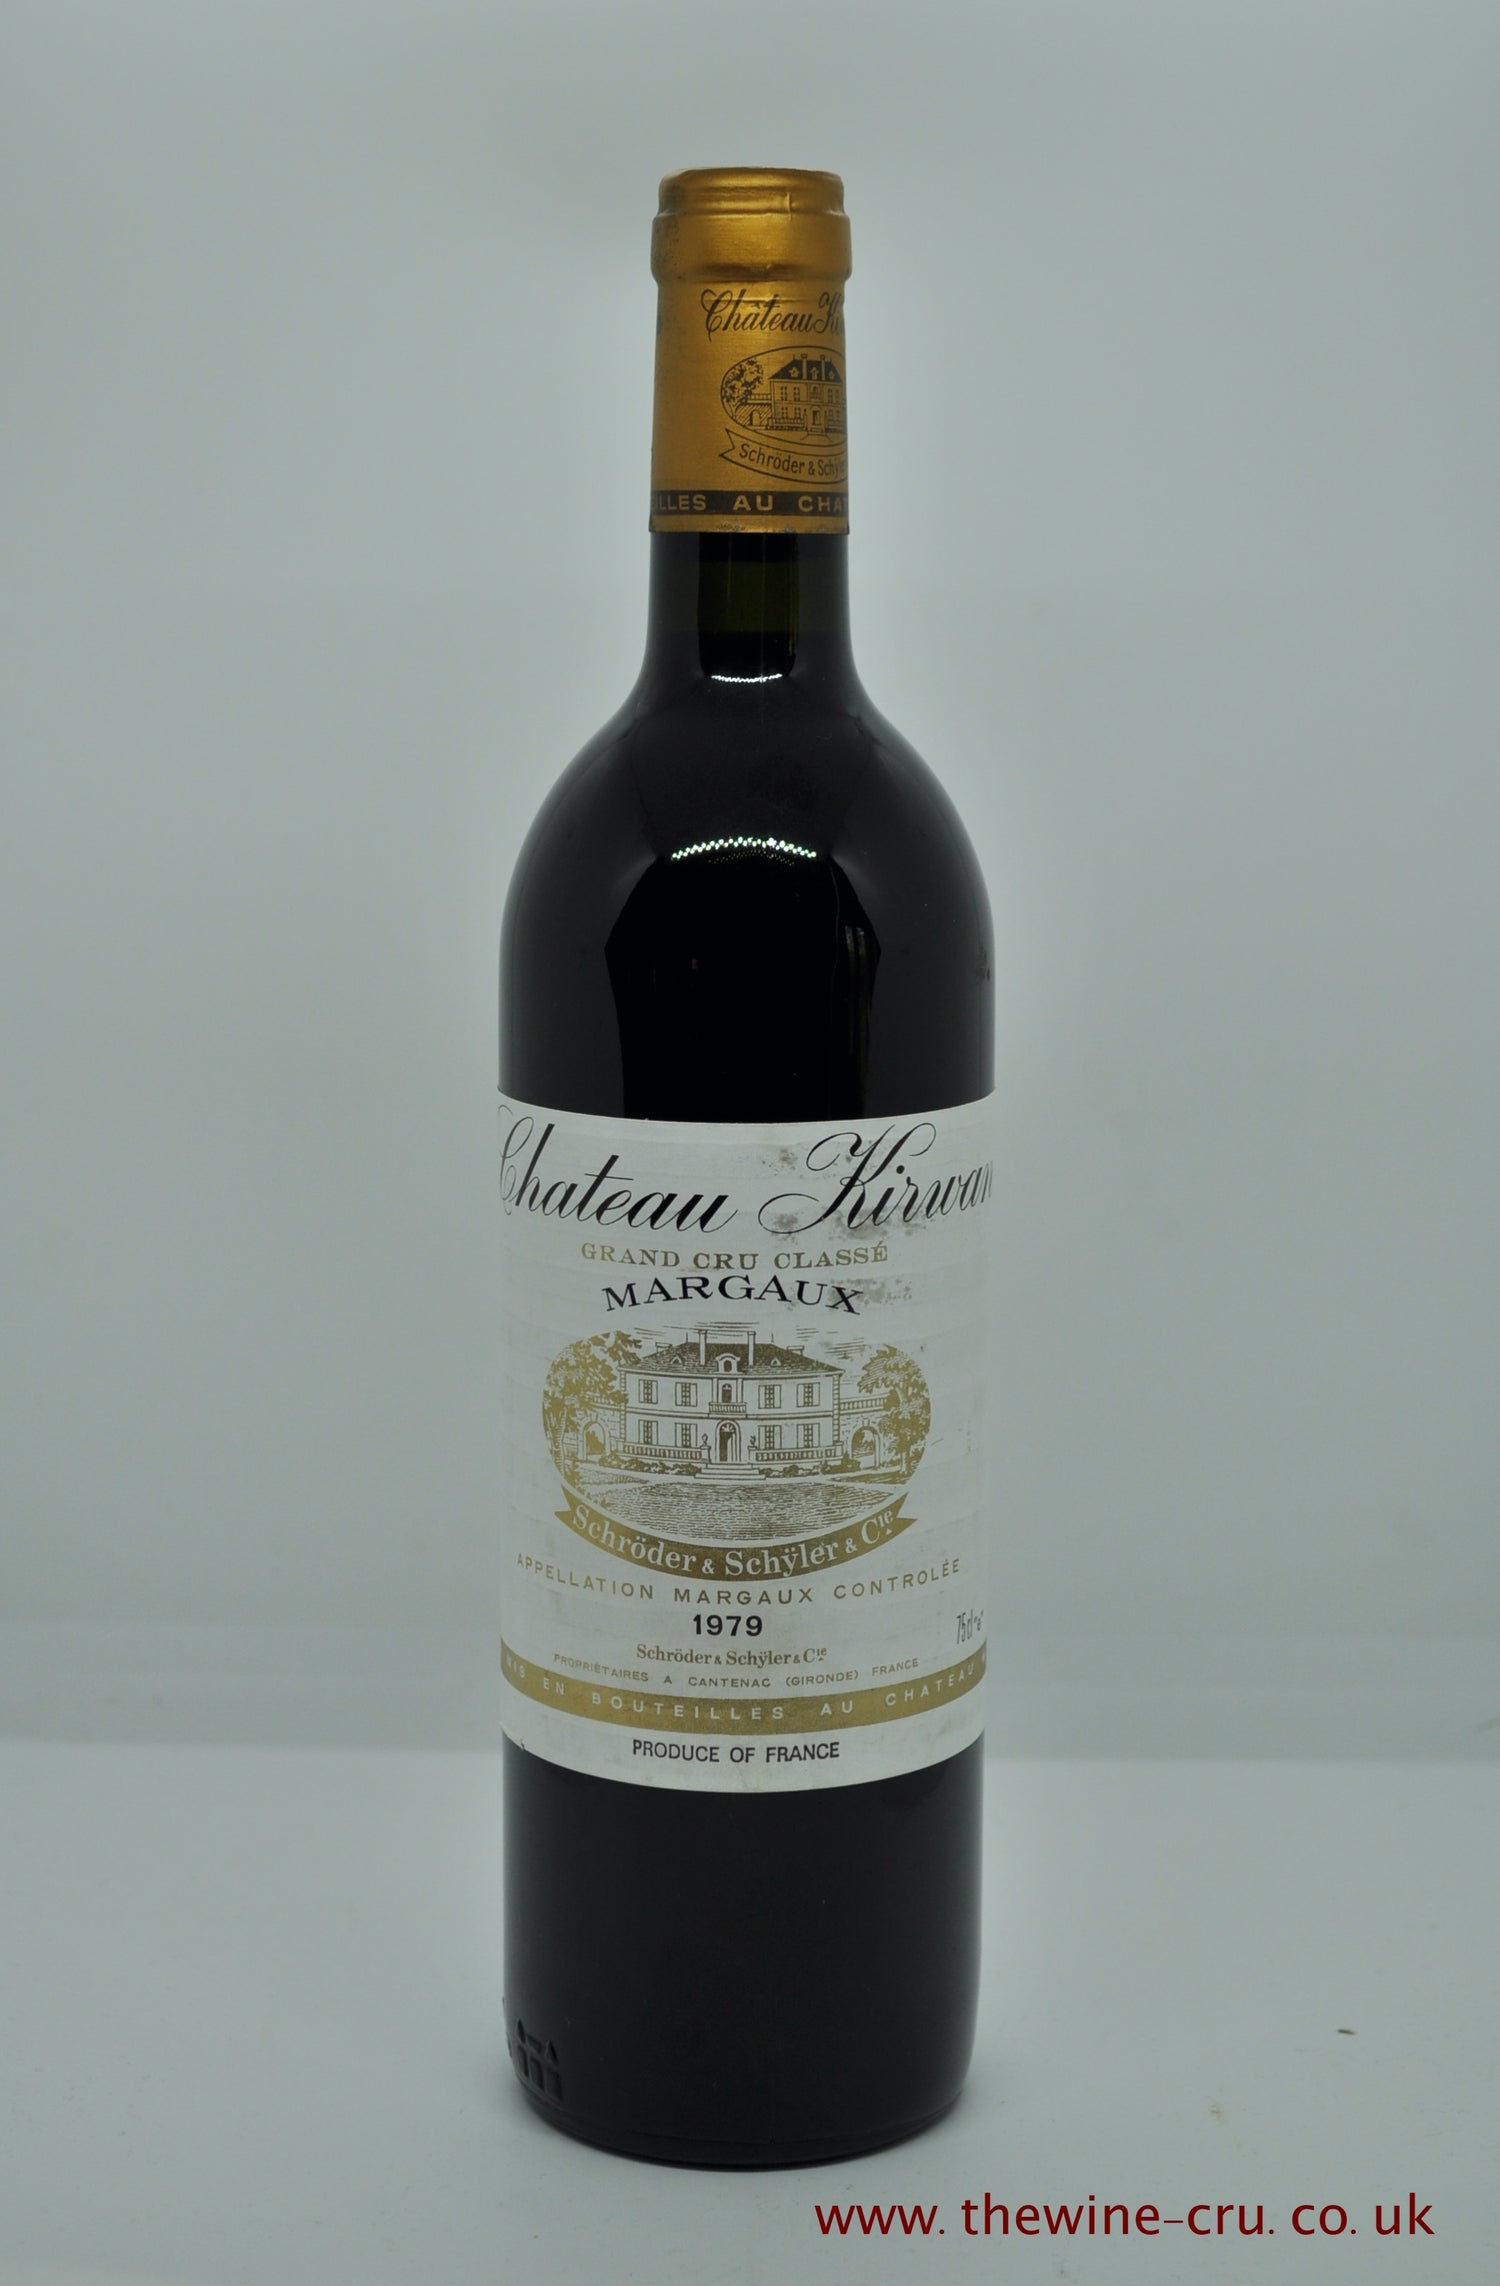 A bottle of 1979 vintage red wine from Chateau Kirwan in Margaux, France. The bottle is in good condition with wine level into neck. Immediate delivery. Free local delivery. Gift wrapping available.